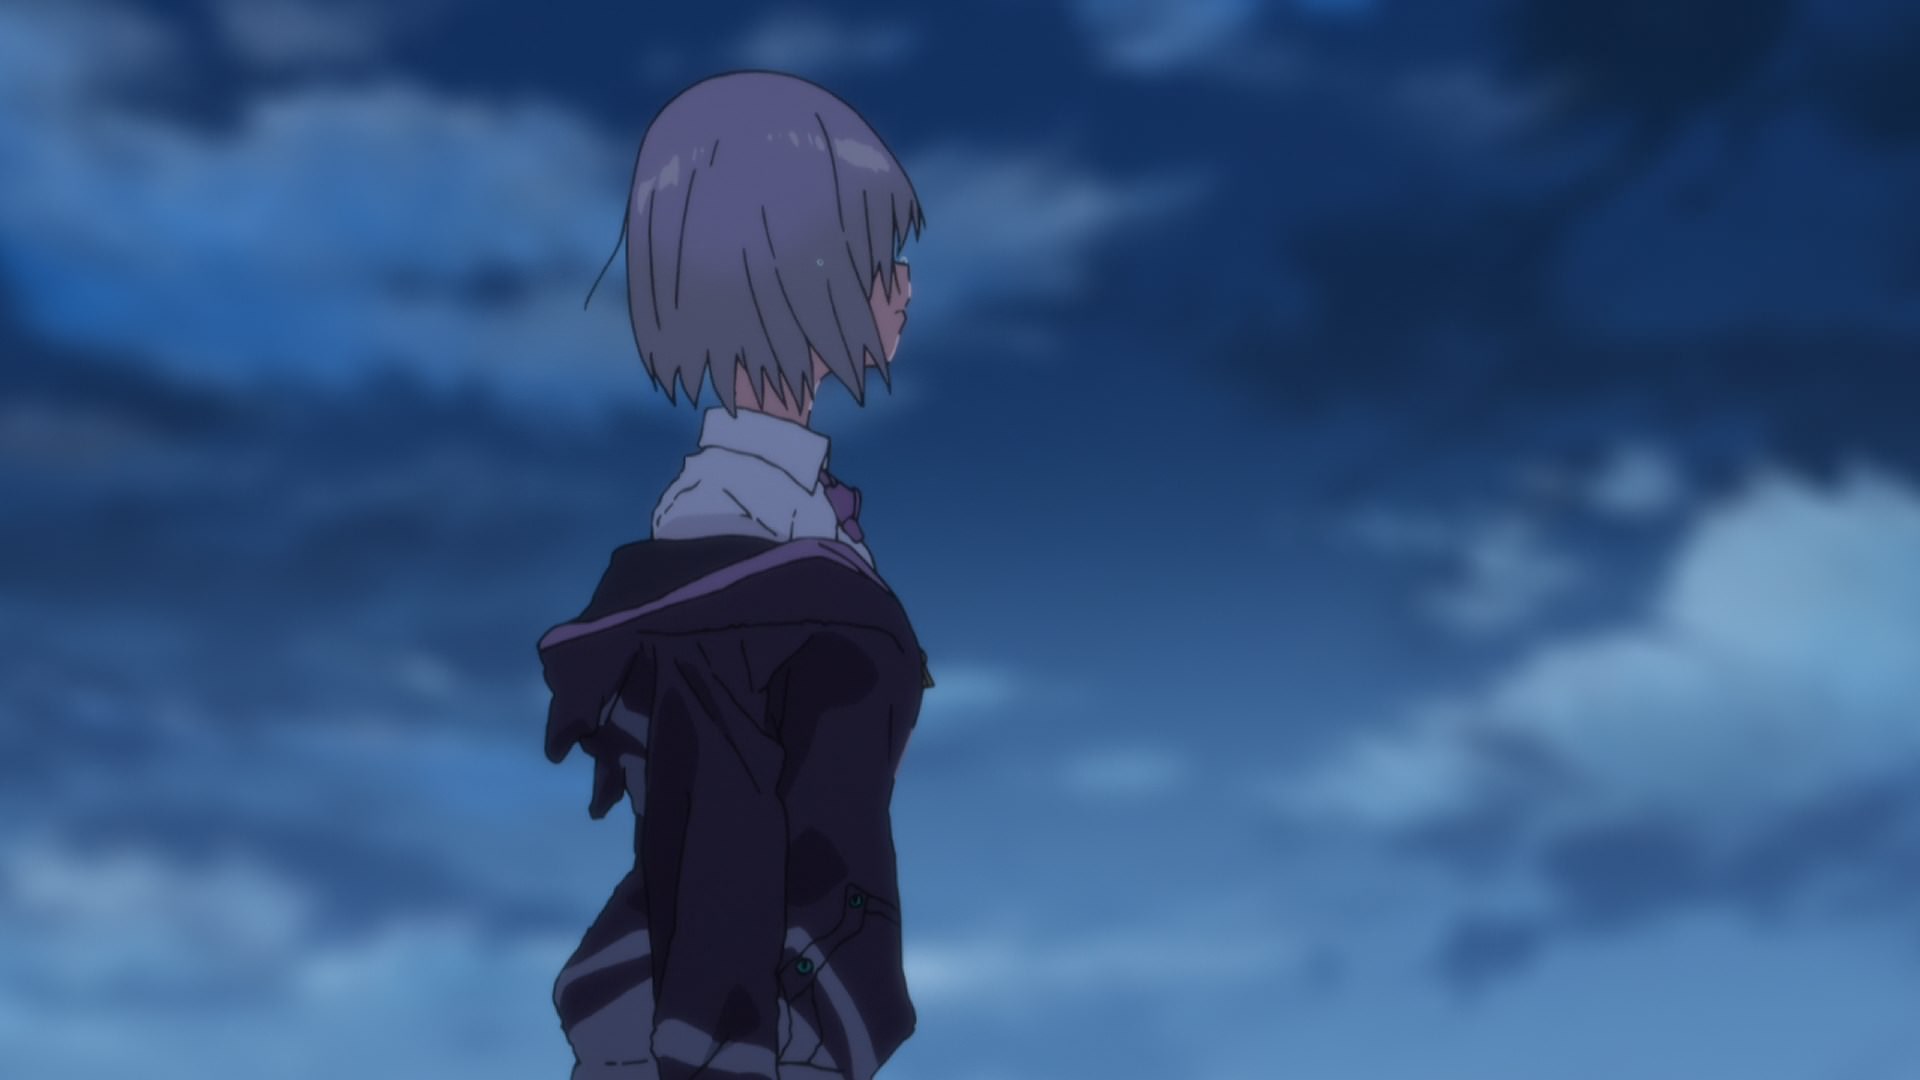 Chainsaw Man Reveals Episode 9 Ending With Song by Aimer - Anime Corner